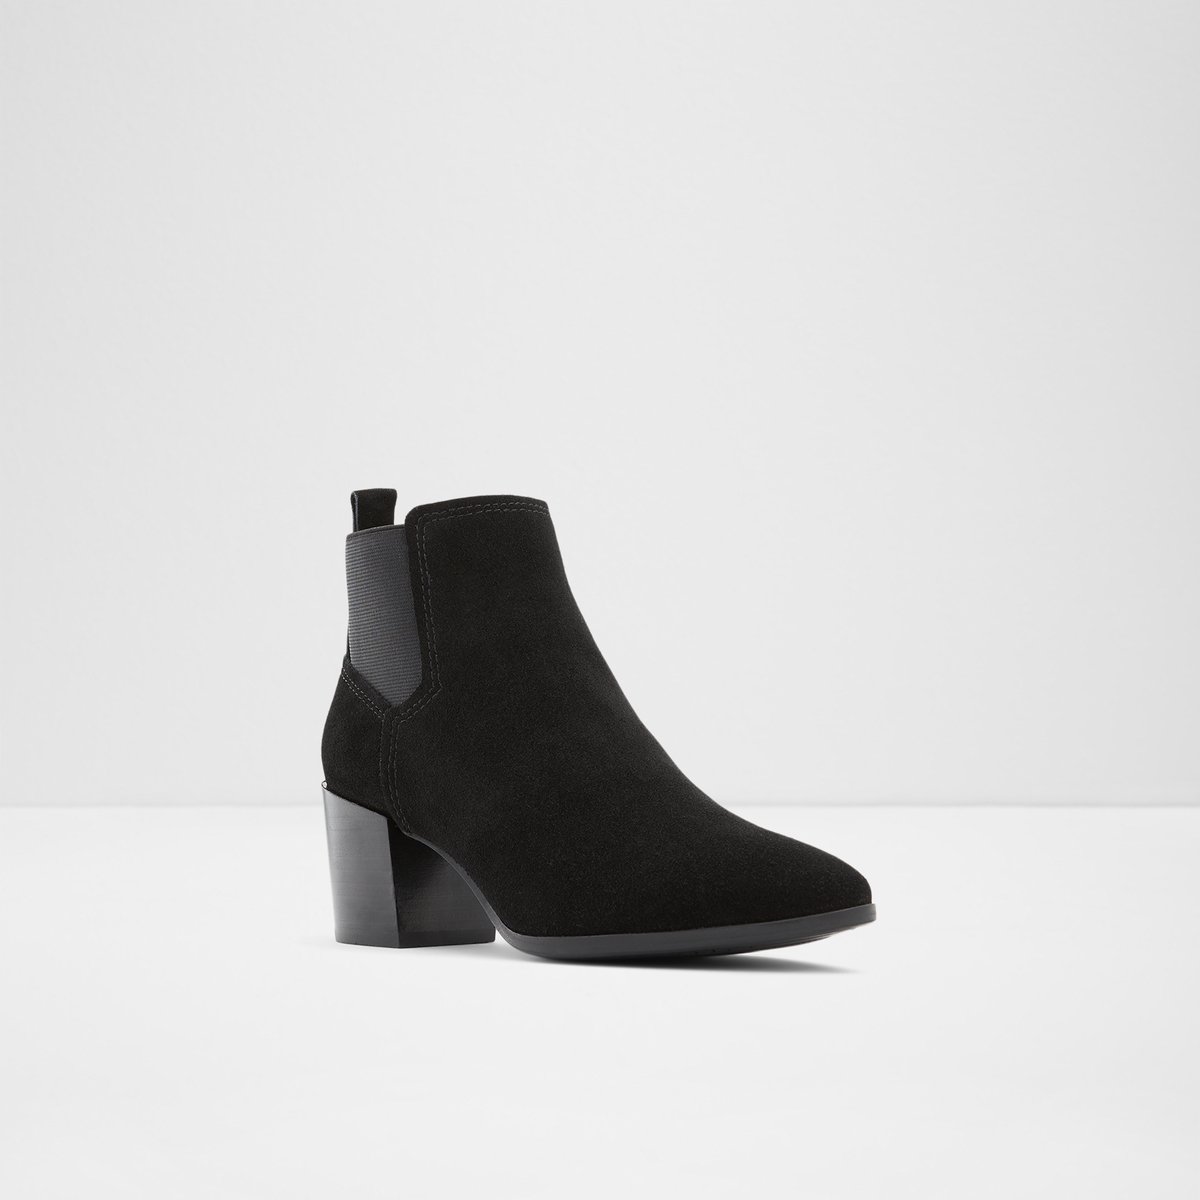 Ibelimma Black Leather Suede Women's Ankle Boots & Booties | Canada